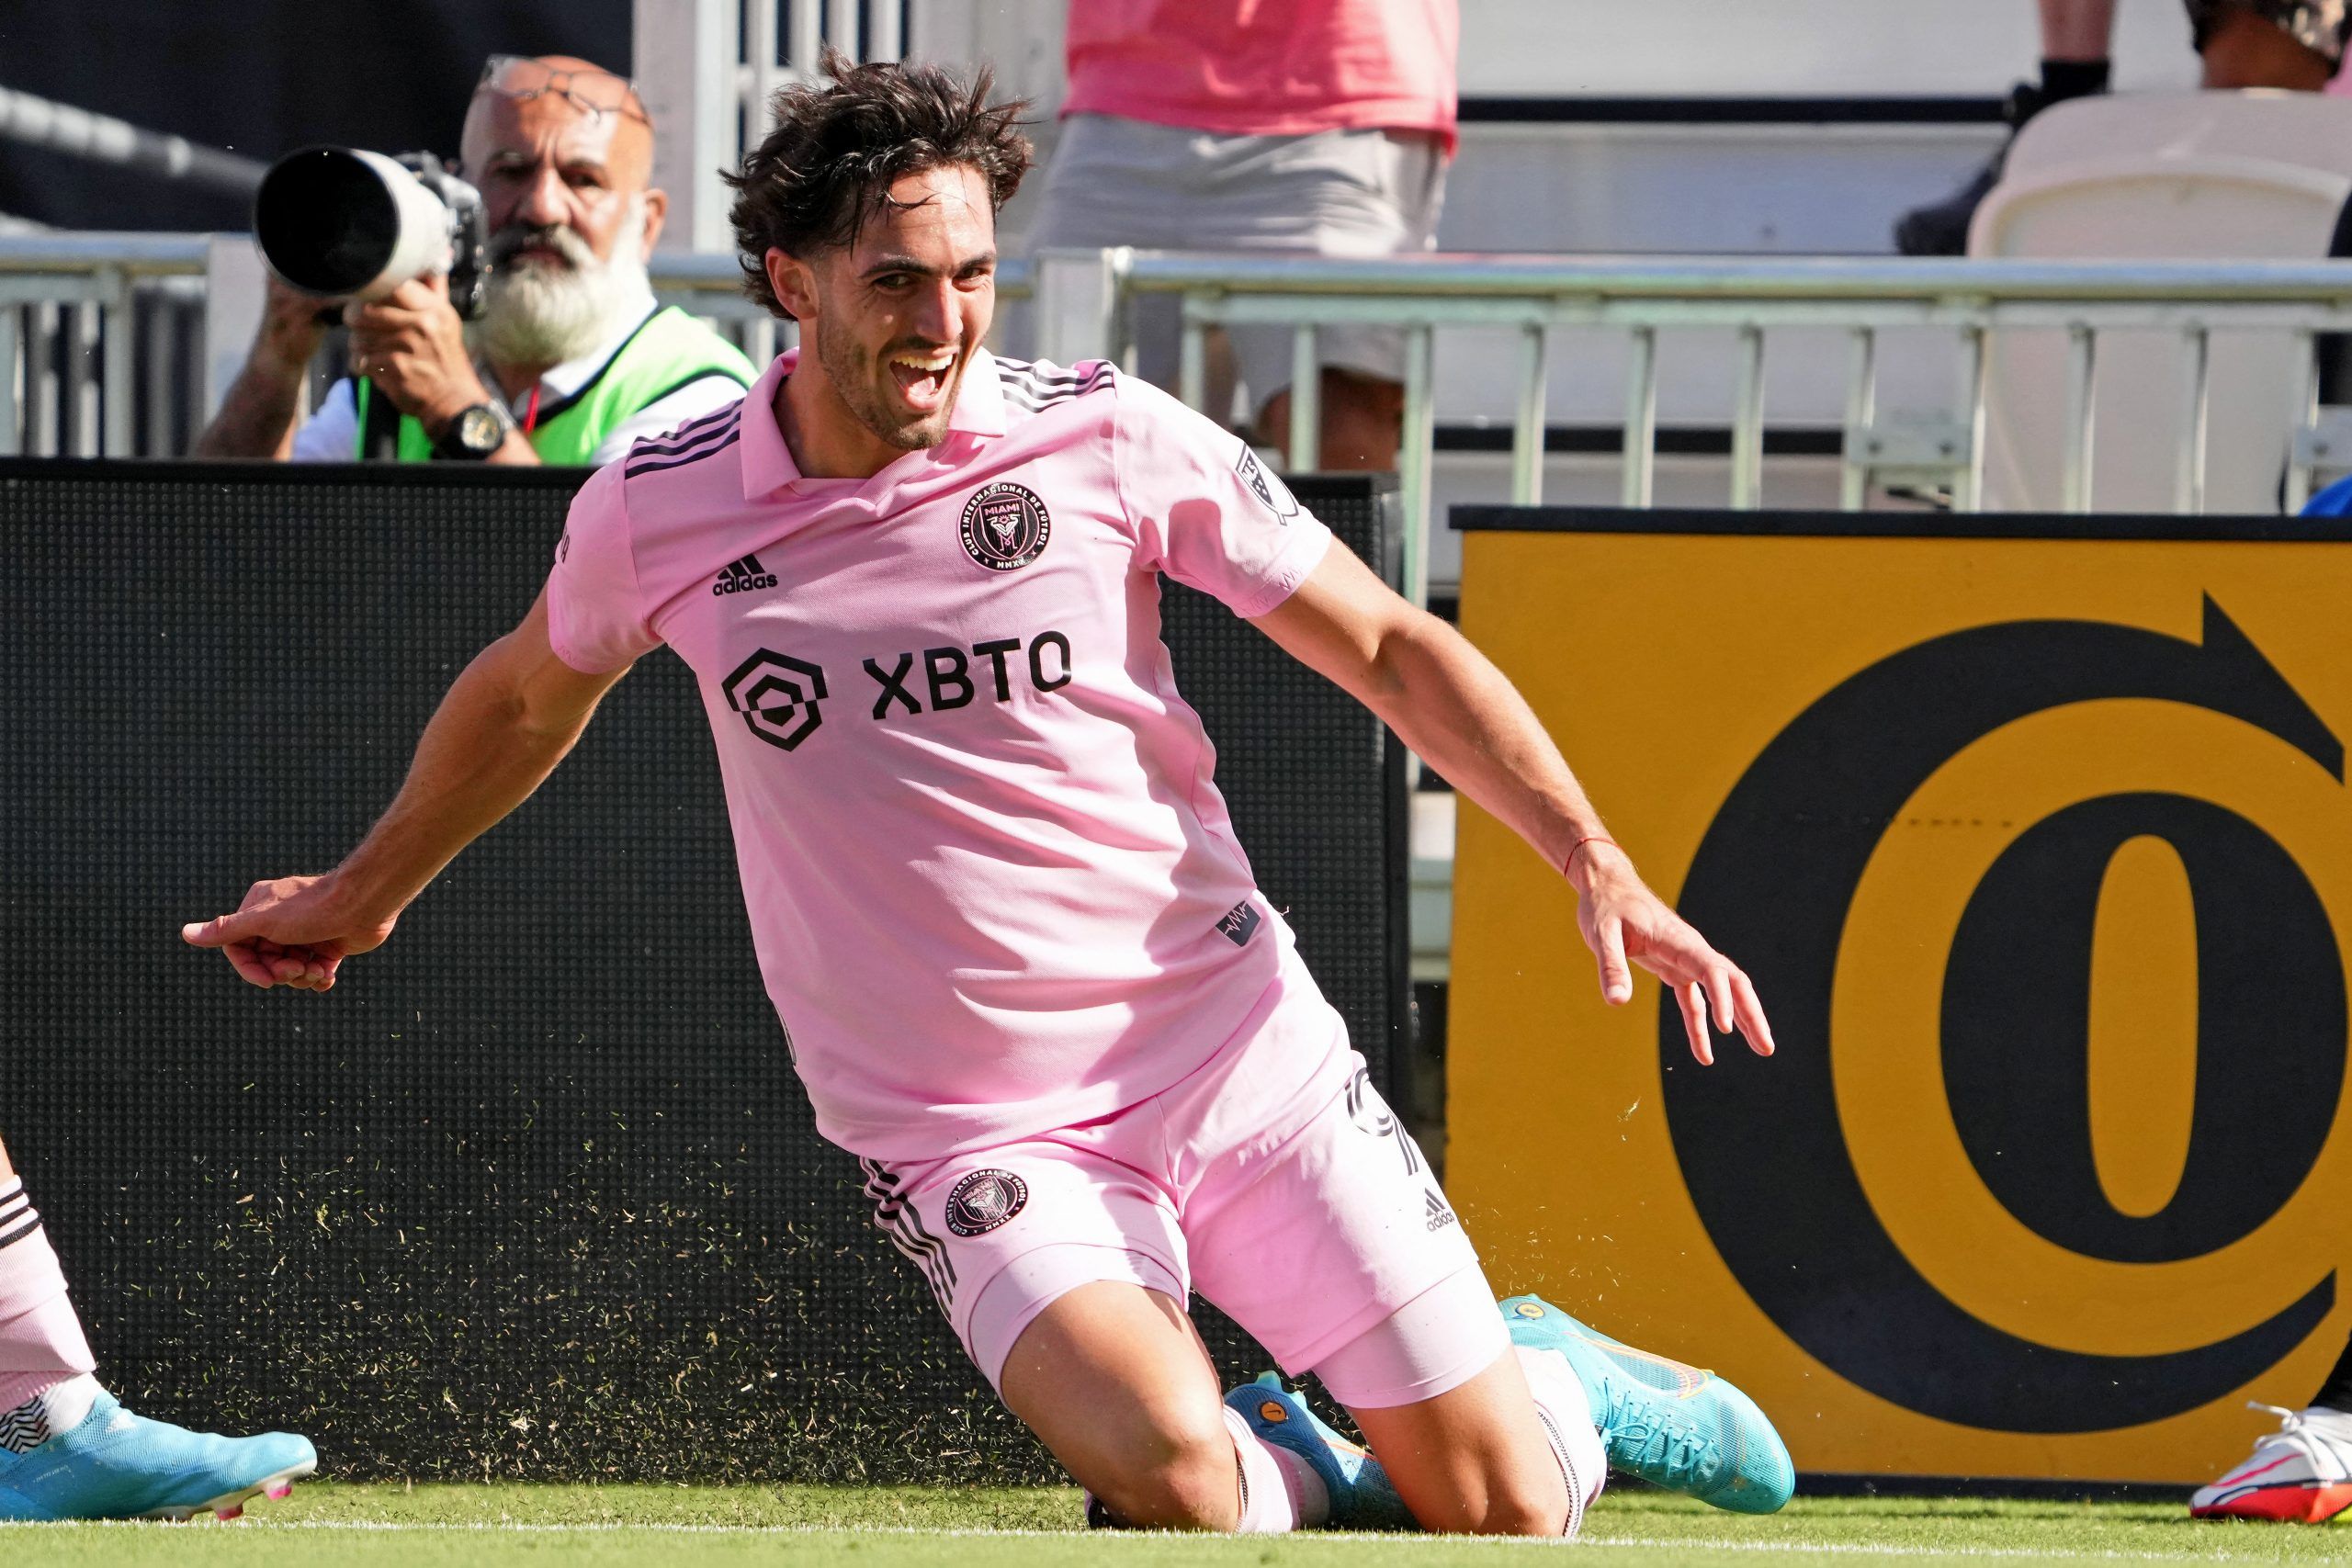 leonardo-campana-inter-miami-wolves-transfer-rumours-mls-latest-raul-jimenez-update-premier-league-molineux-trincaoApr 9, 2022; Fort Lauderdale, Florida, USA; Inter Miami CF forward Leonardo Campana (9) reacts after scoring his third goal of the game against the New England Revolution during the second half at DRV PNK Stadium. Mandatory Credit: Jasen Vinlove-USA TODAY Sports